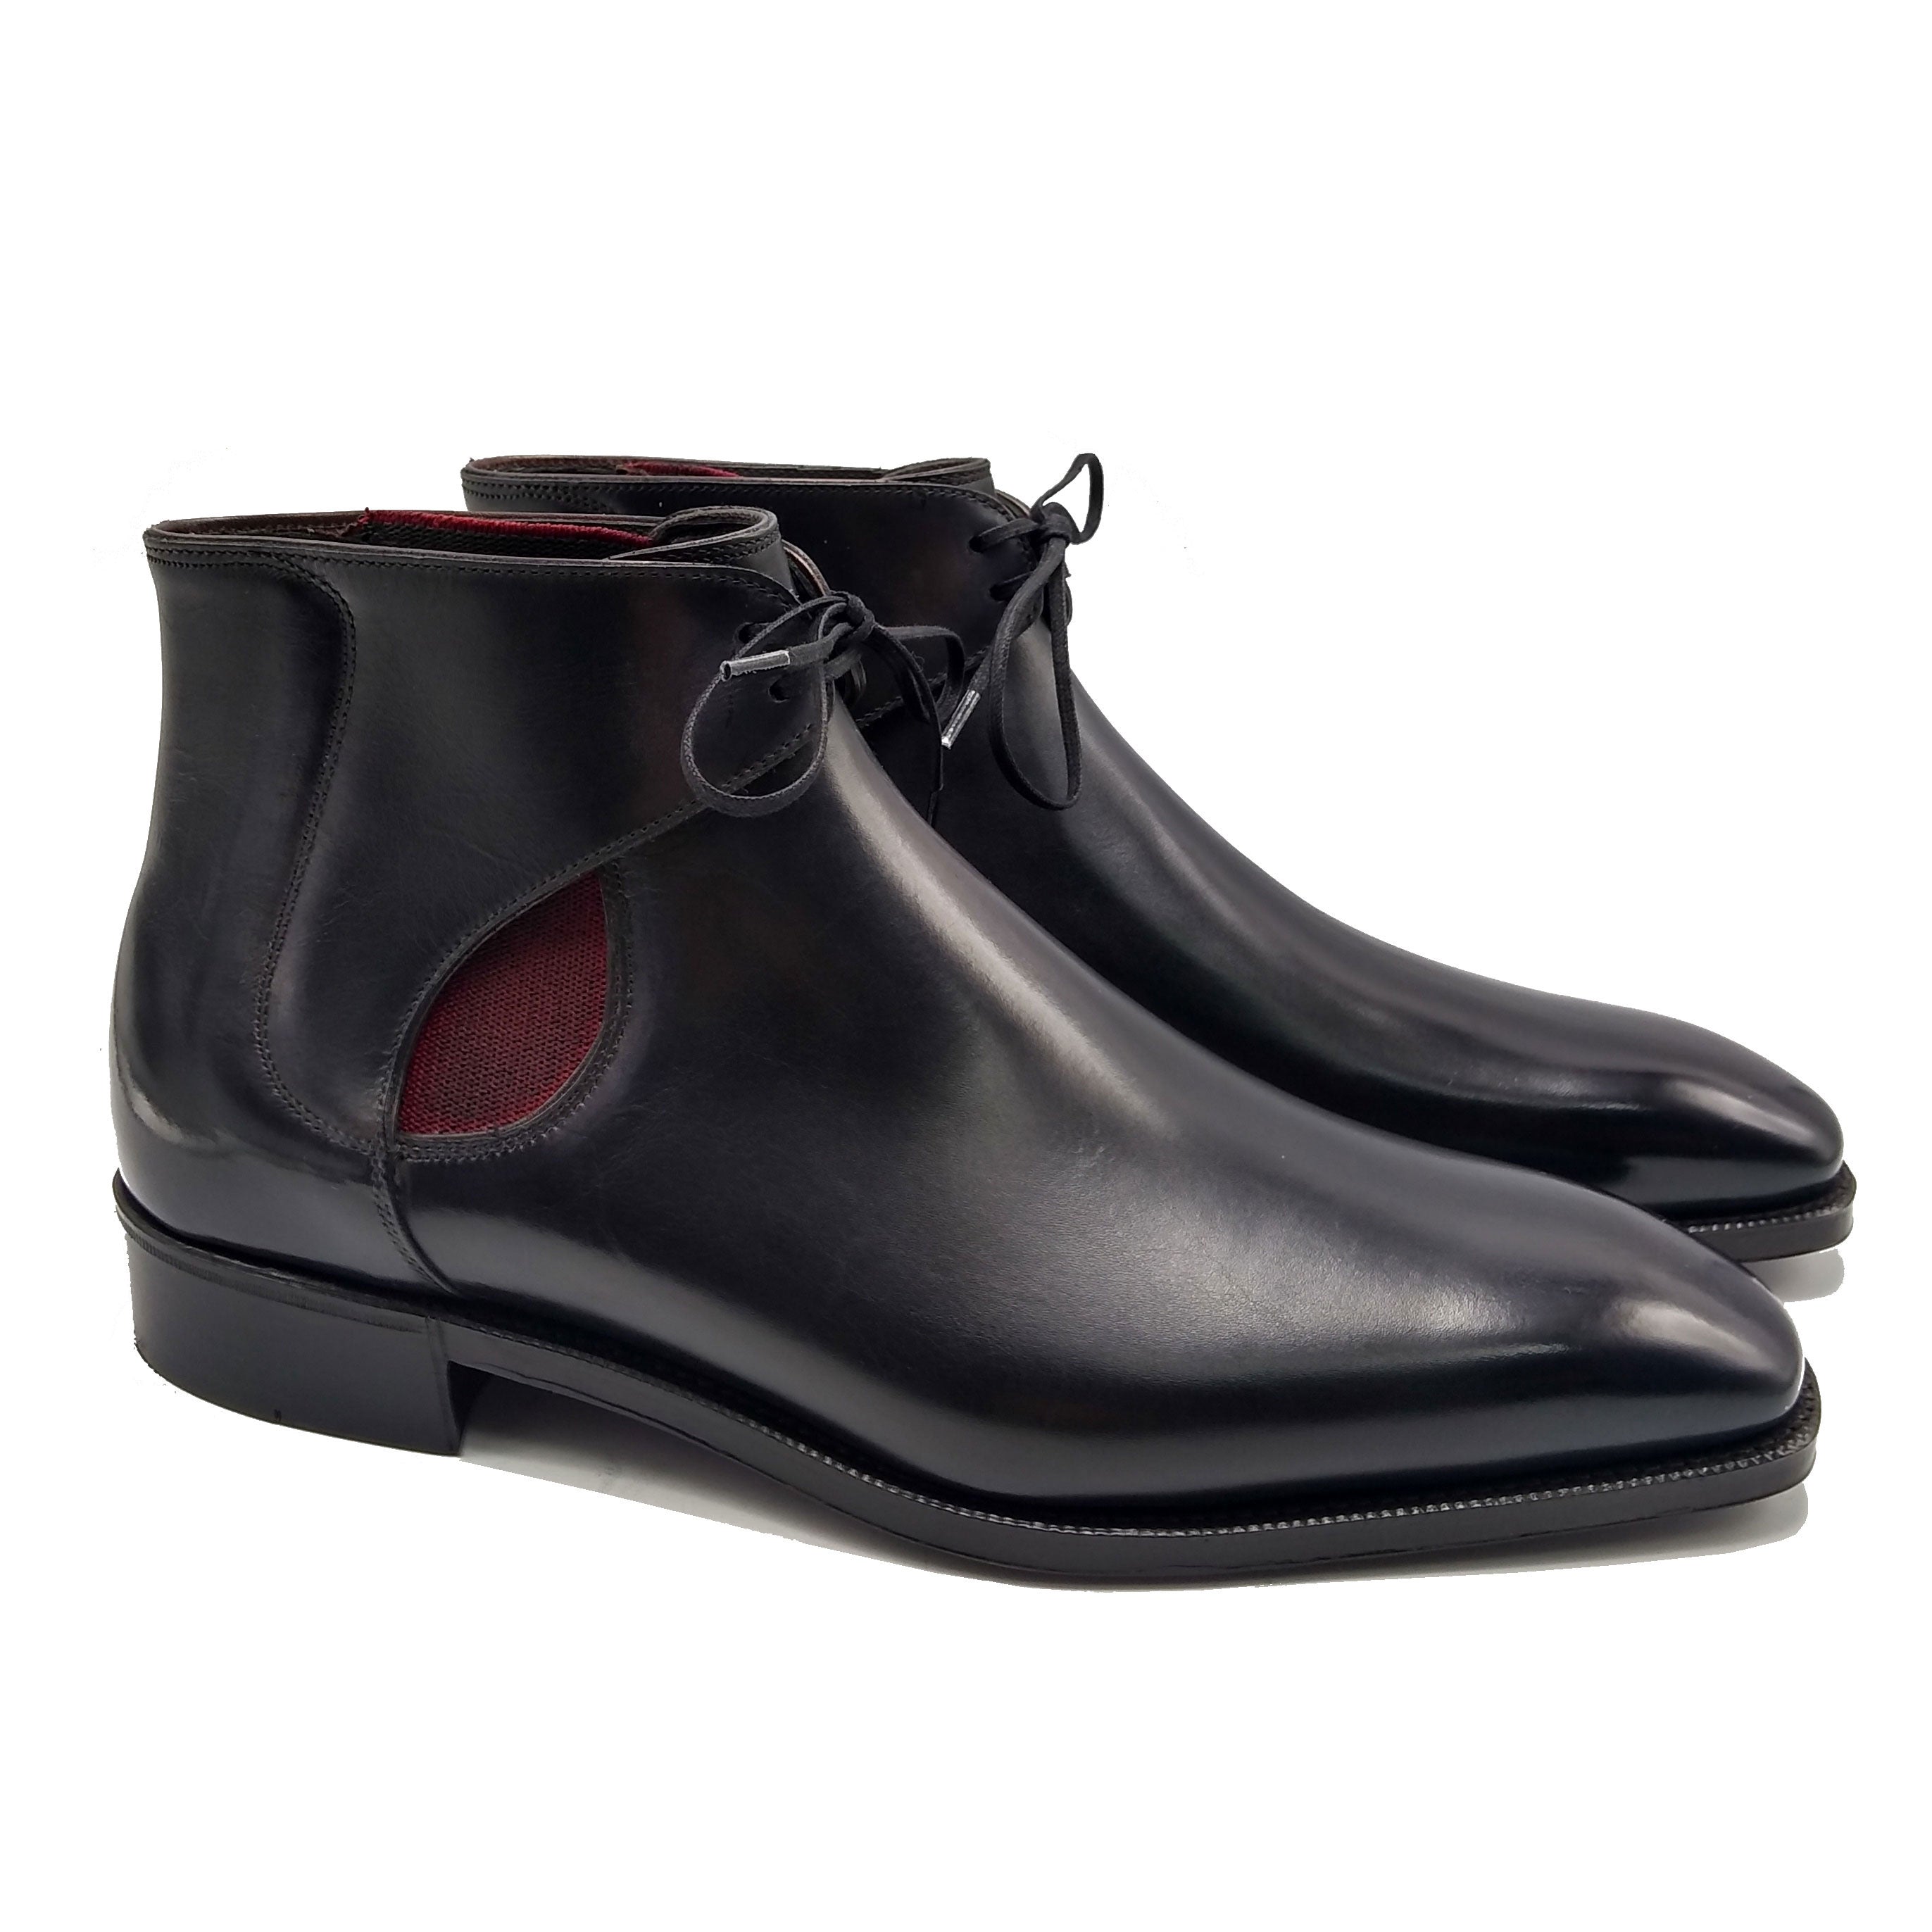 Men's Leather Shoes and Boots in Barcelona, Spain - Black Colletion